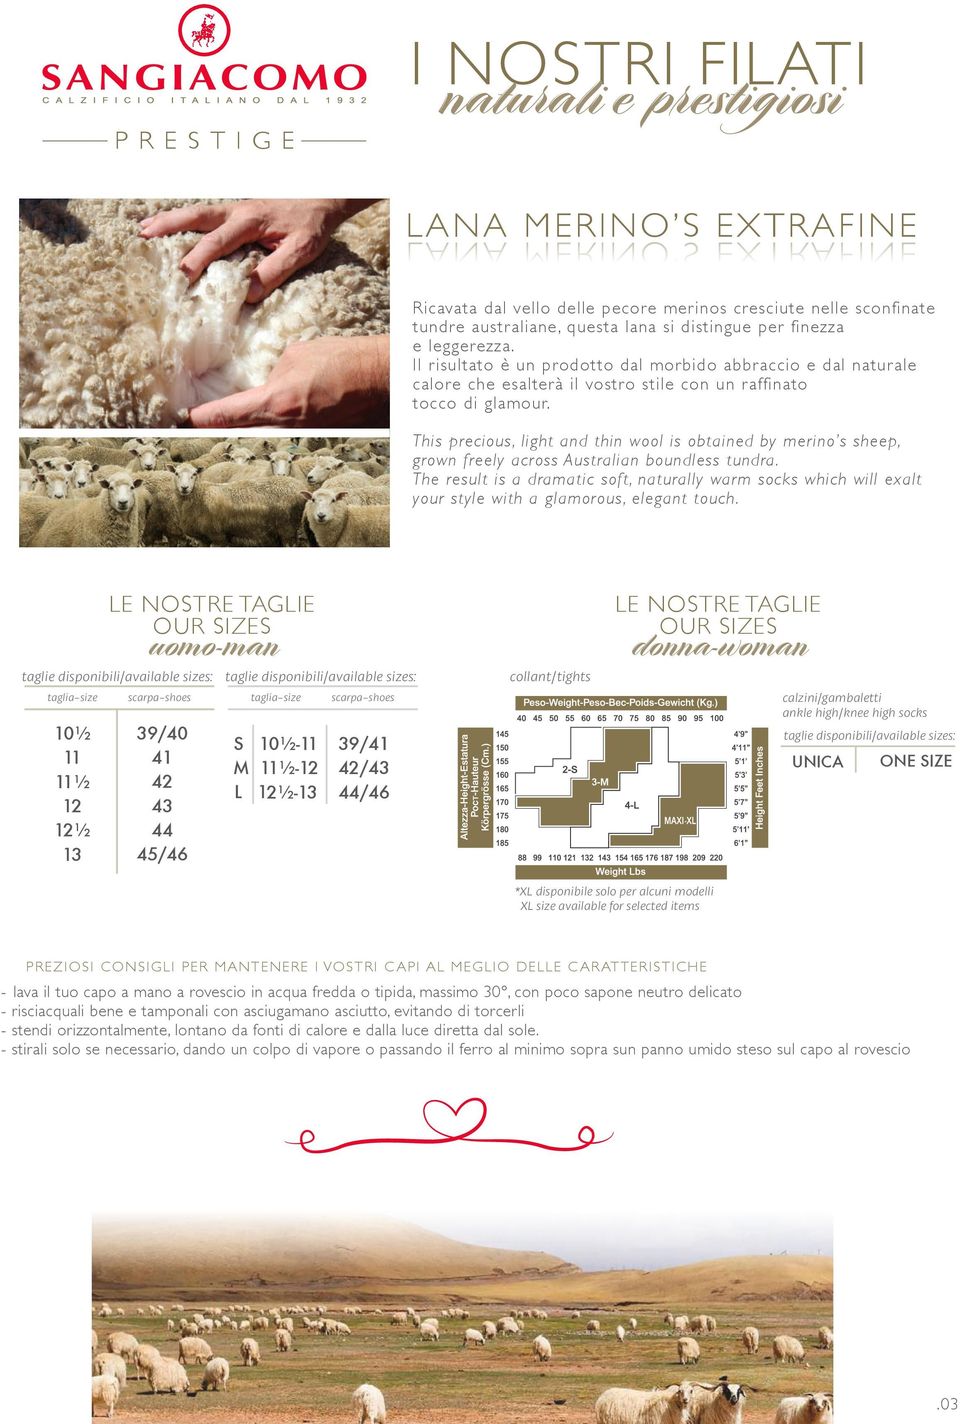 This precious, light and thin wool is obtained by merino s sheep, grown freely across Australian boundless tundra.